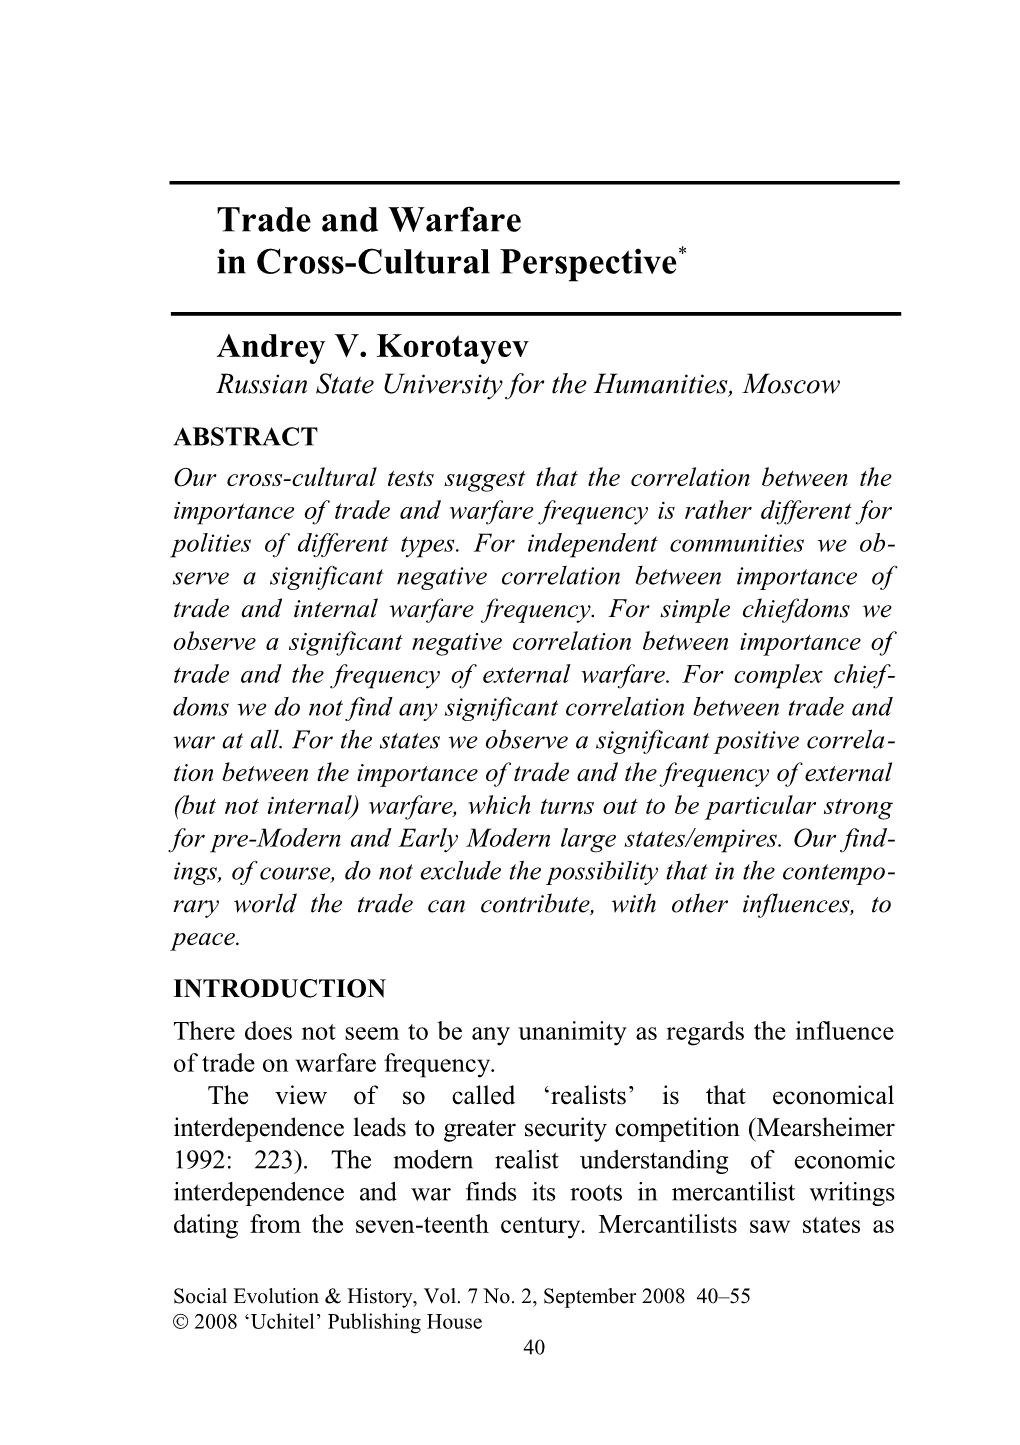 Idealism, Materialism, and Biology in the Analysis of Cultural Evolution s3